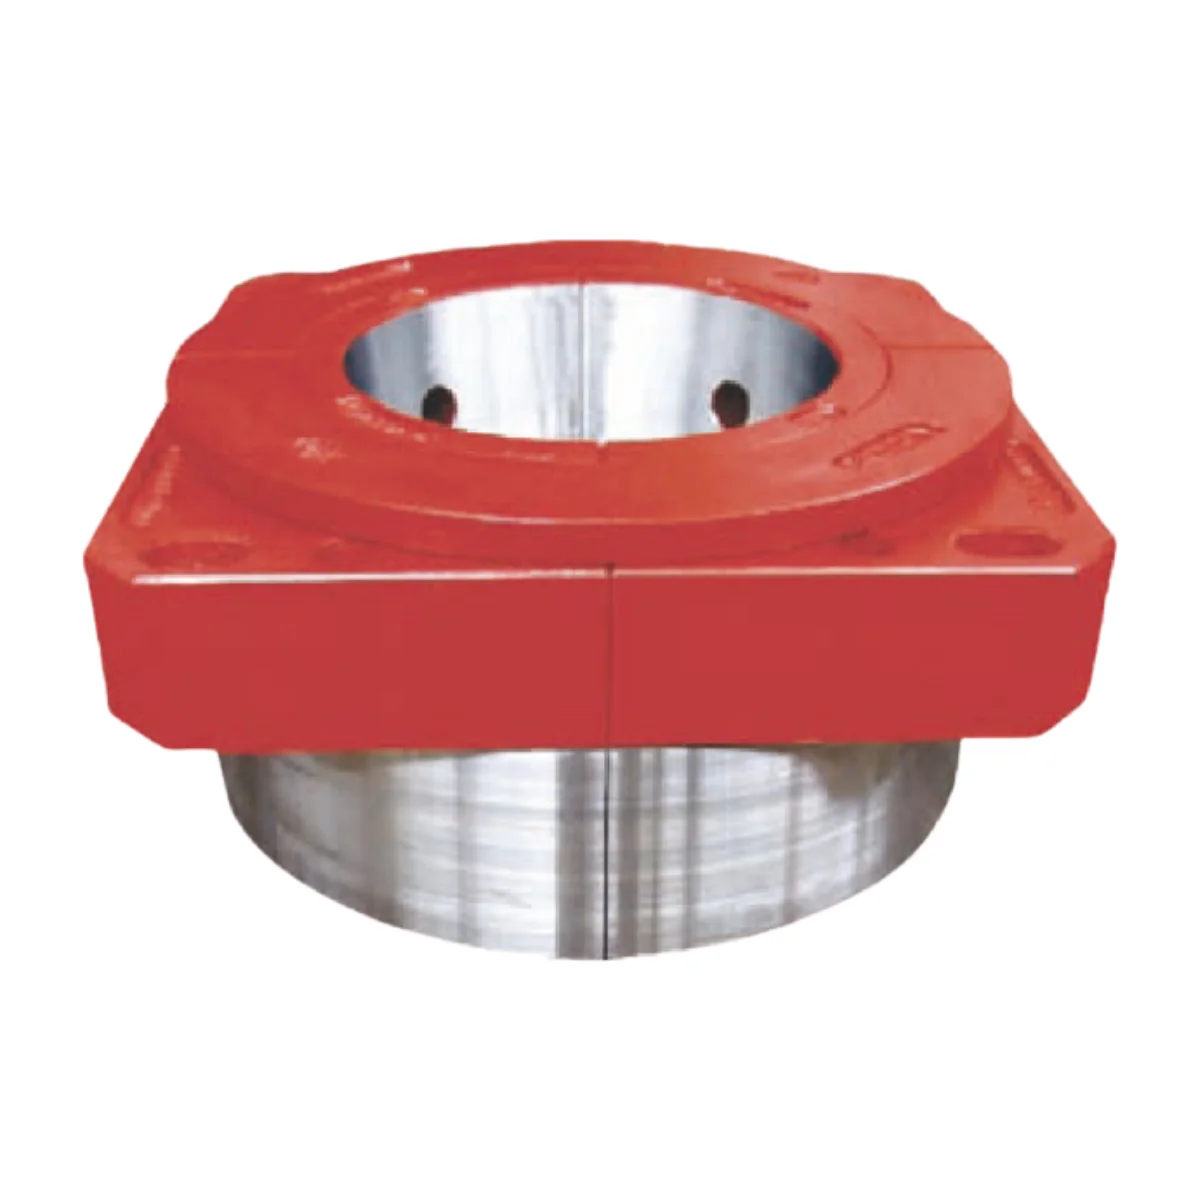 Square casing bushings for oilfield handling tools, including equivalents from NOV, Varco, DenCon, Forum, Bvm, Bv, and Rutong. These bushings are designed to accommodate square casing, providing stability and support during drilling operations. Options are available for both standard and 27.5-inch sizes, as well as specific rotary table models. These components play a crucial role in ensuring efficient and effective drilling in the oilfield.